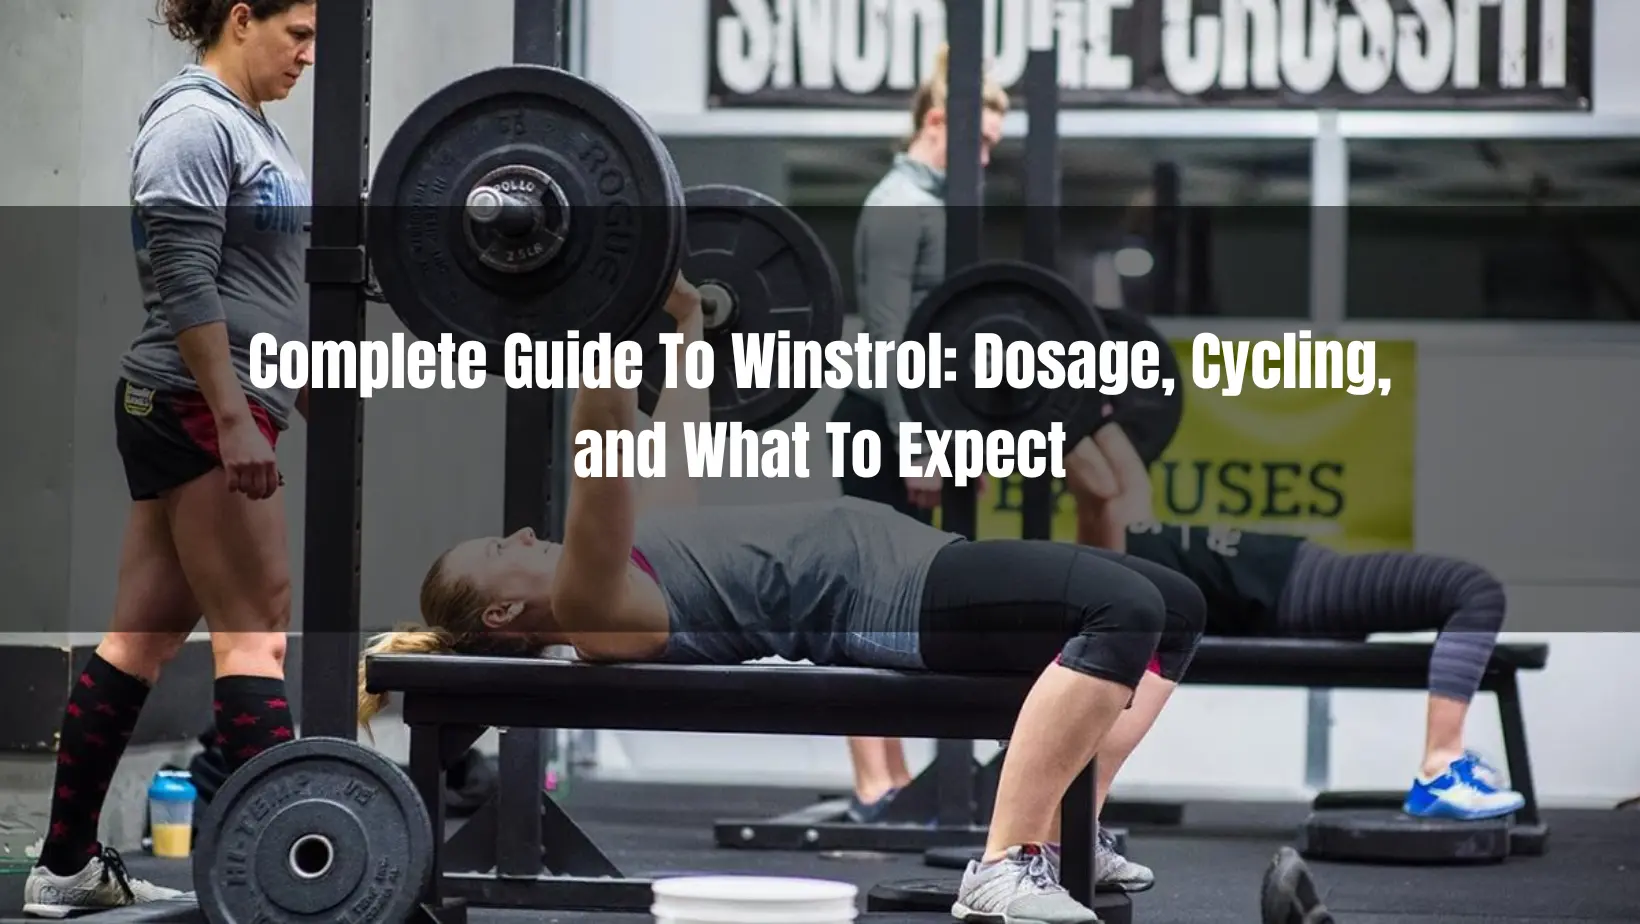 Winstrol Complete Guide: Dosage, Cycling, Side Effects, and What to Expect